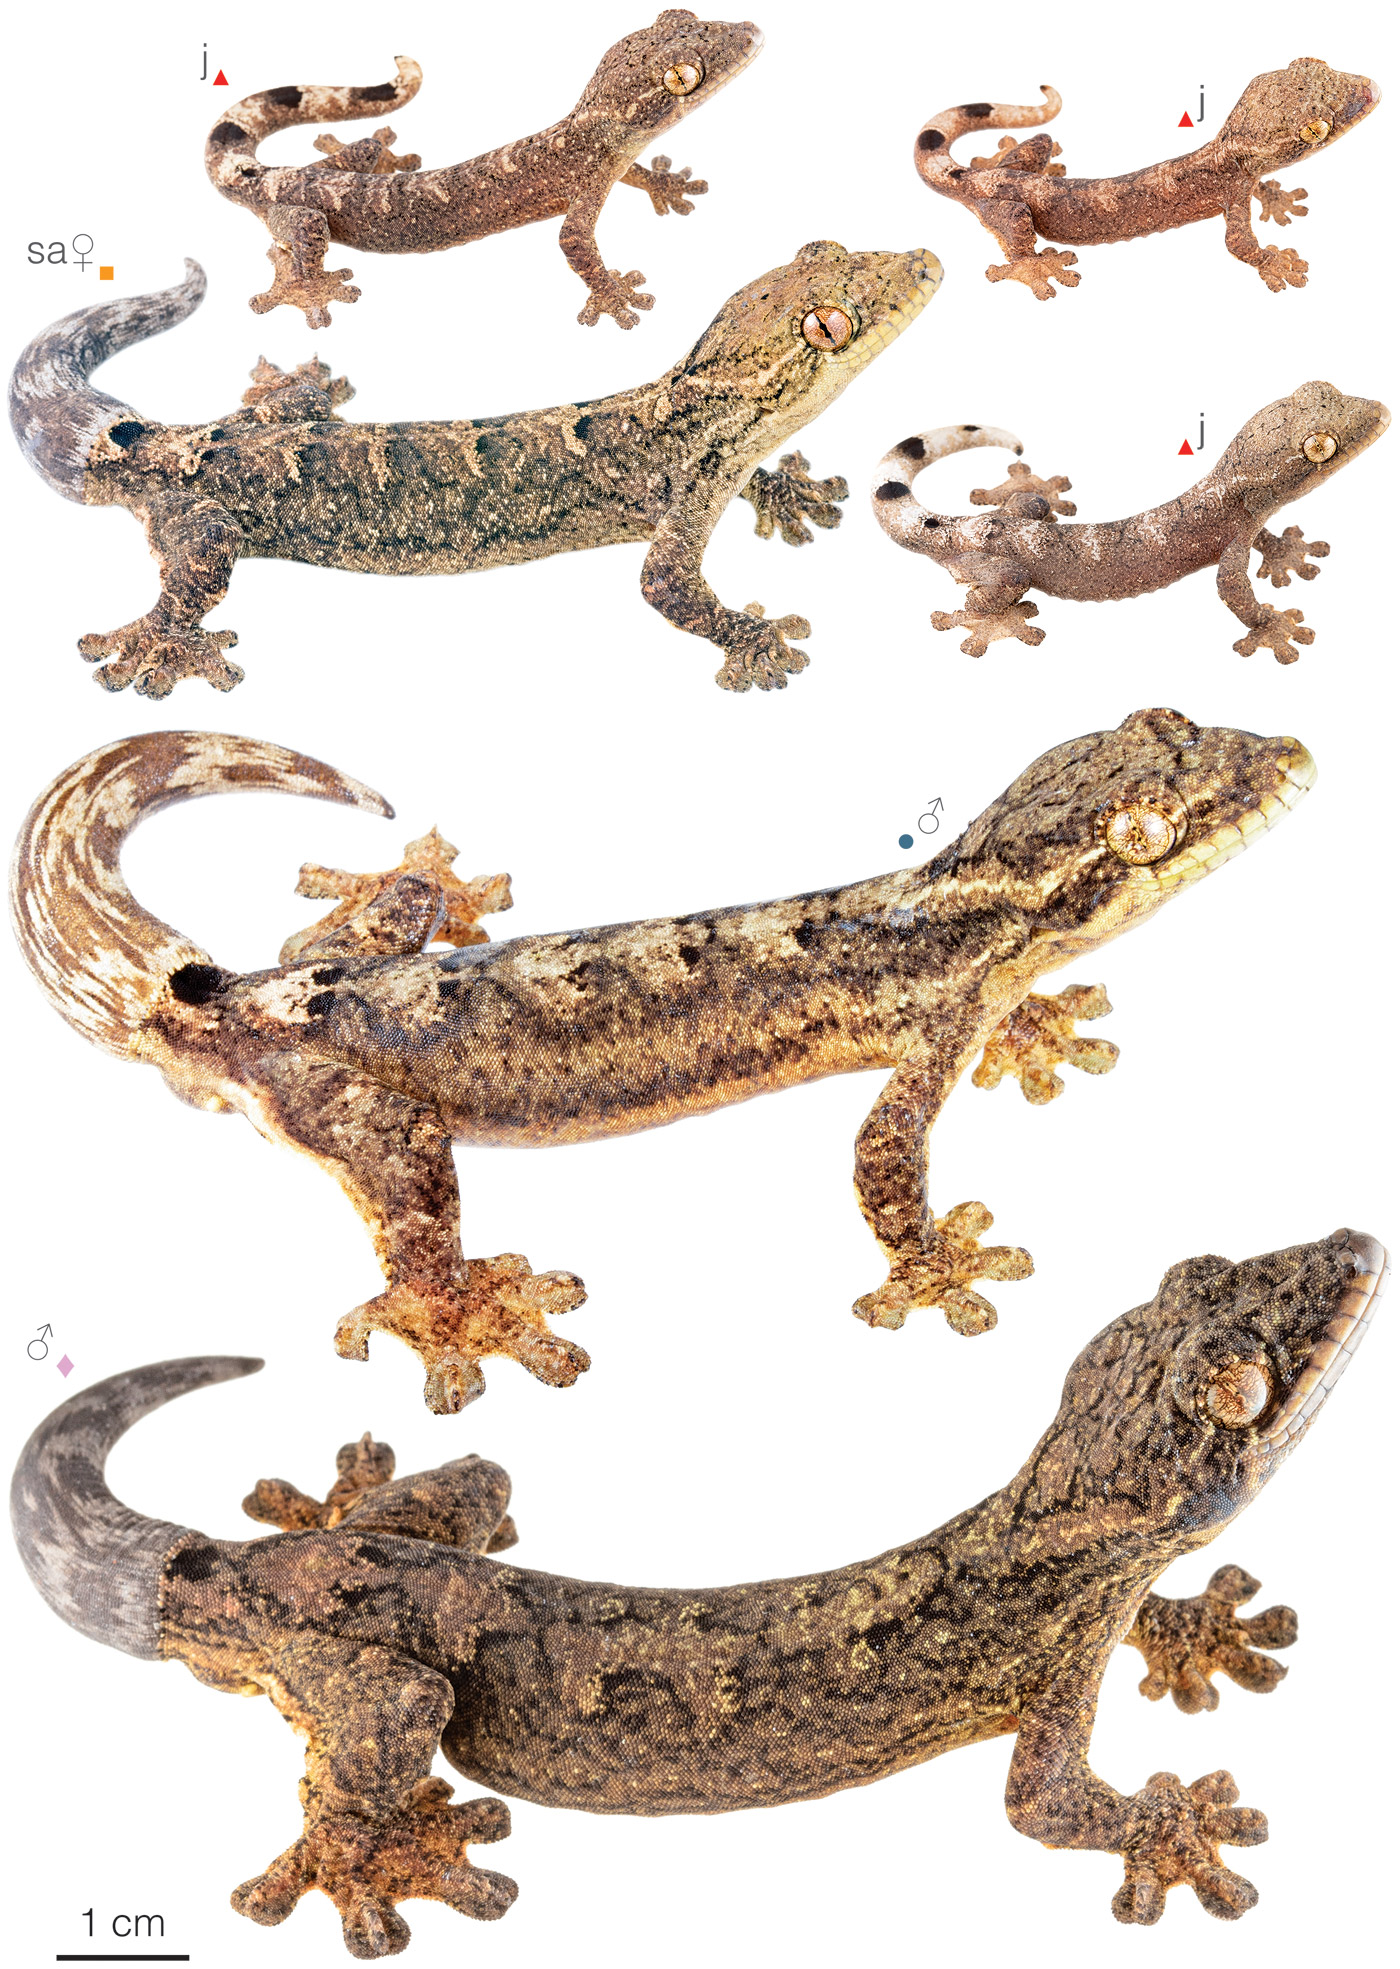 Figure showing variation among individuals of Thecadactylus solimoensis